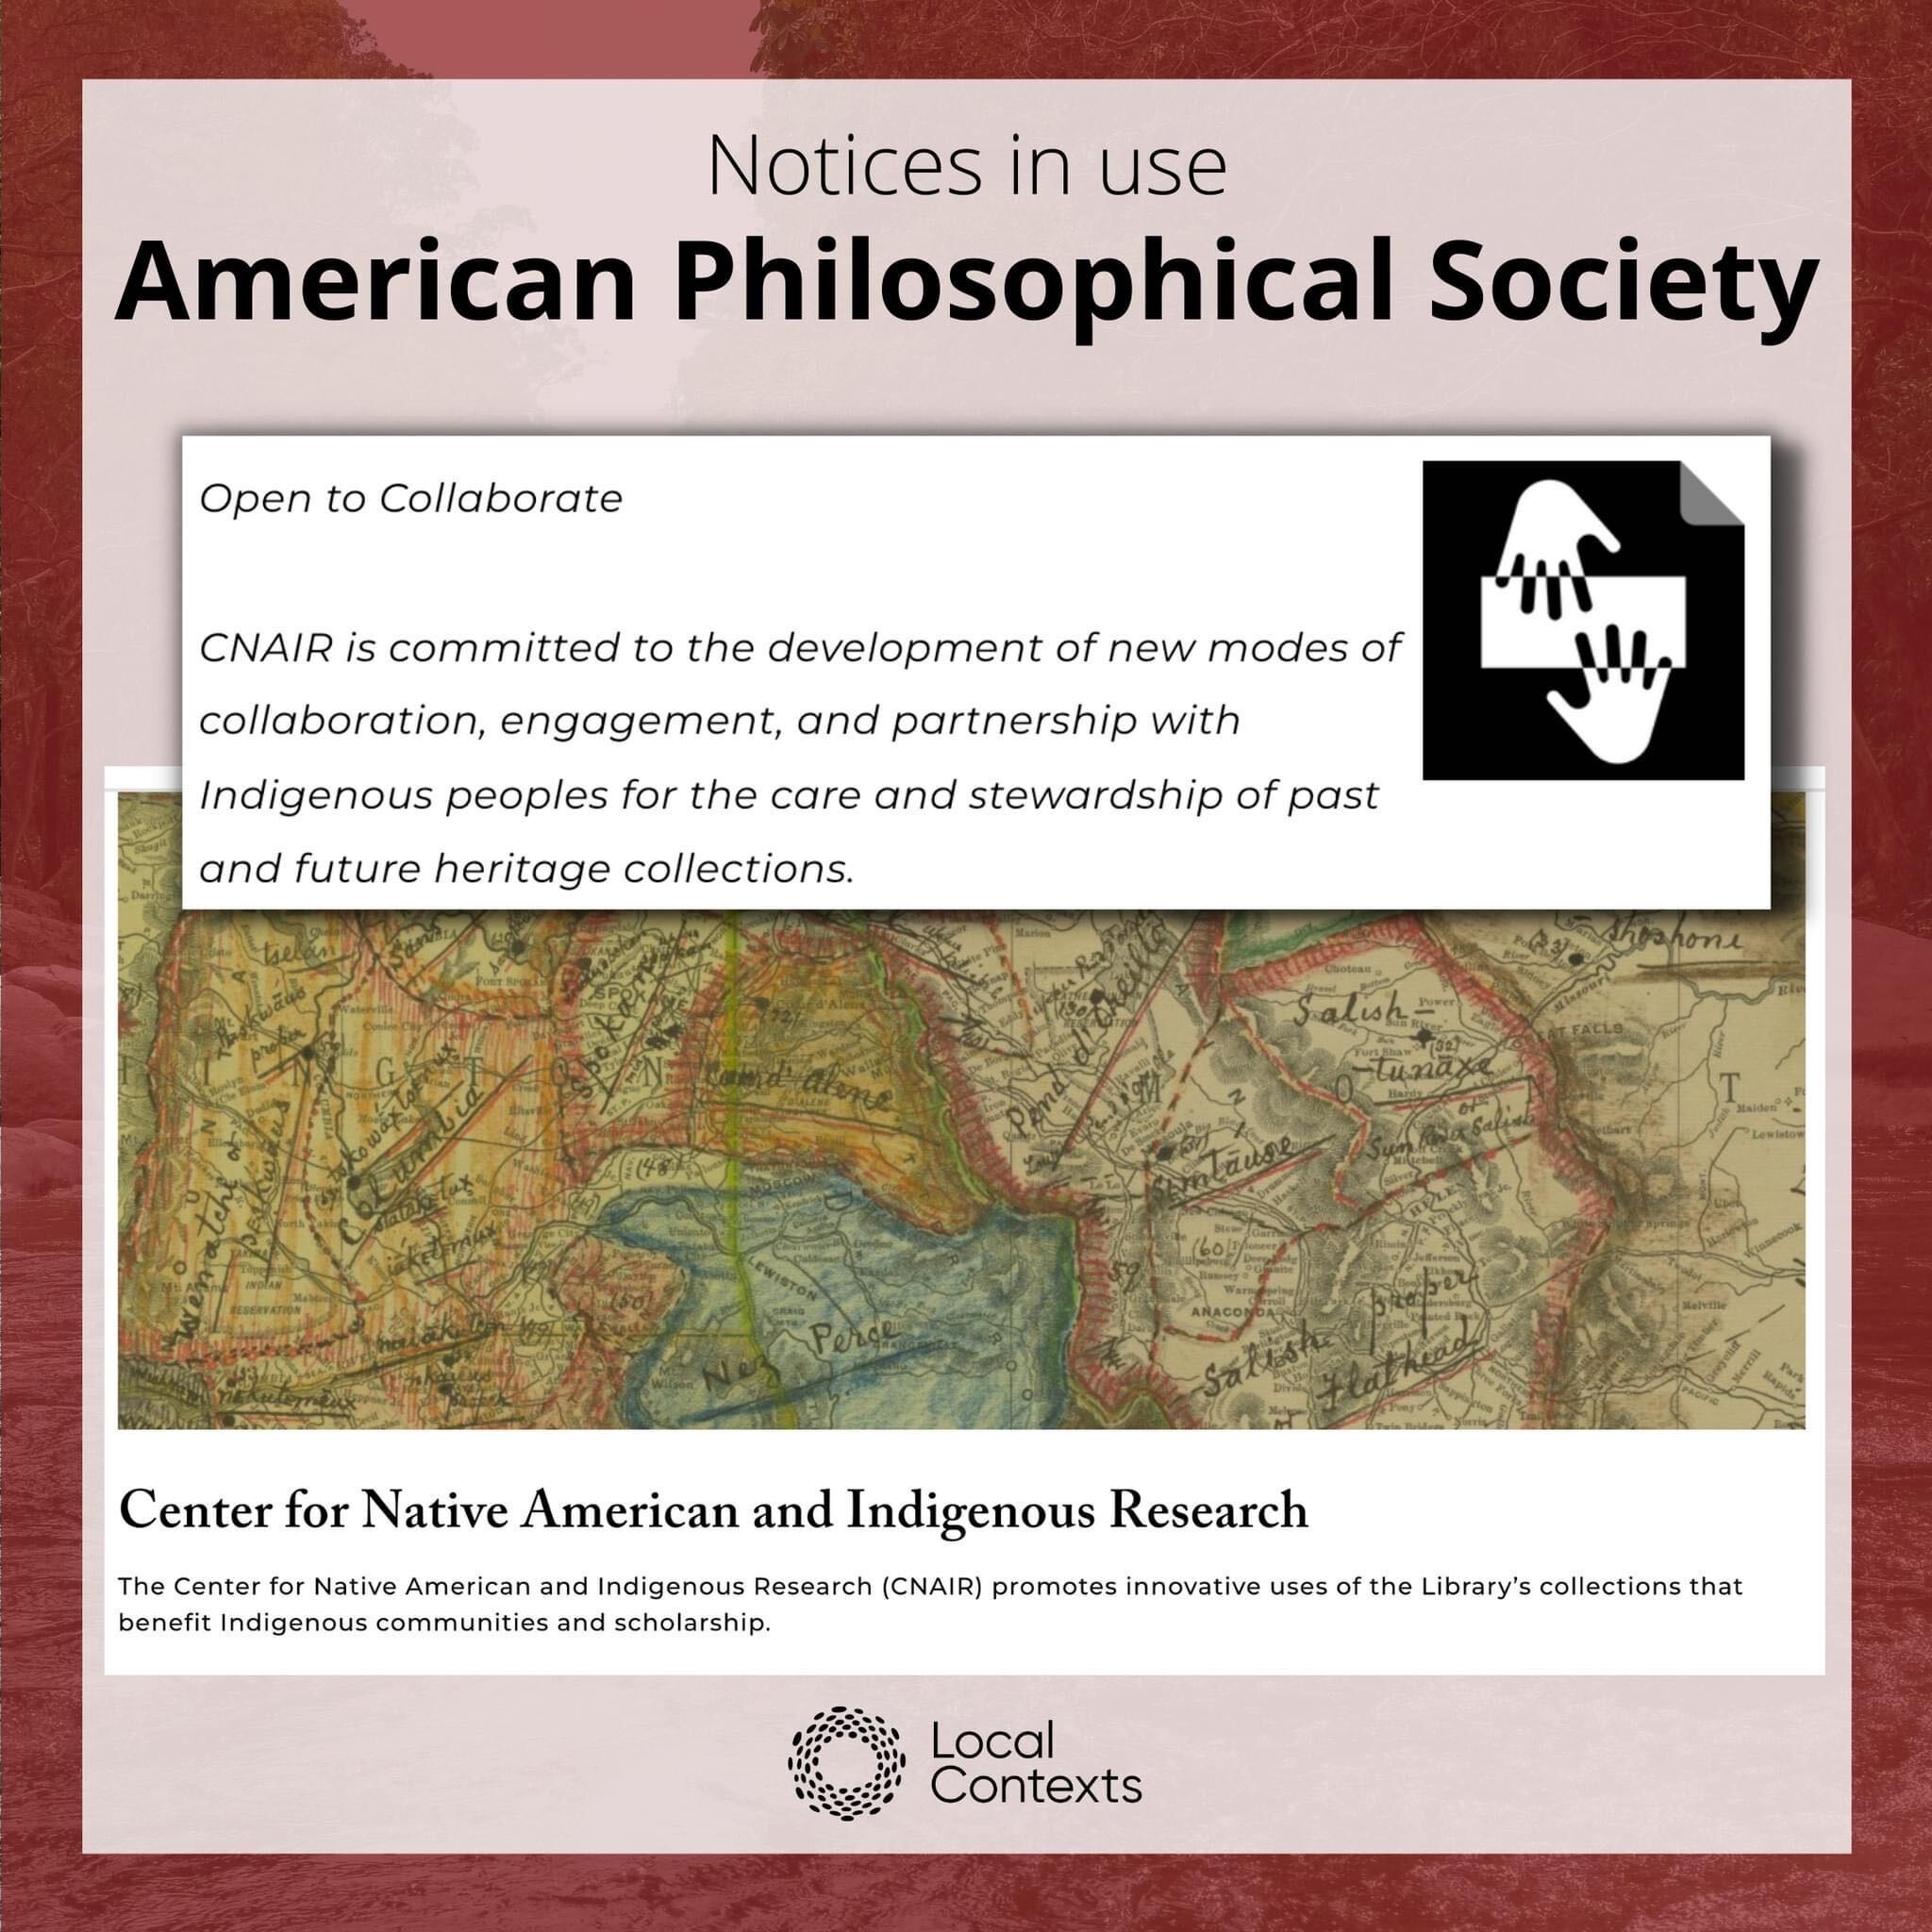 Black text on dark red decorative background: “Notices in use. American Philosophical Society.” In the center are two screenshots. One shows the homepage of the Center for Native American and Indigenous Research at the American Philosophical Society, which is mainly a close-up of a hand-drawn map. In the second screenshot is the Notice icon, a black square icon with two hands facing each other, next to the Notice text: “Open to Collaborate. CNAIR is committed to the development of new modes of collaboration, engagement, and partnership with Indigenous peoples for the care and stewardship of past and future heritage collections.” At the bottom right corner in black is the Local Contexts logo, a ring made of dots.